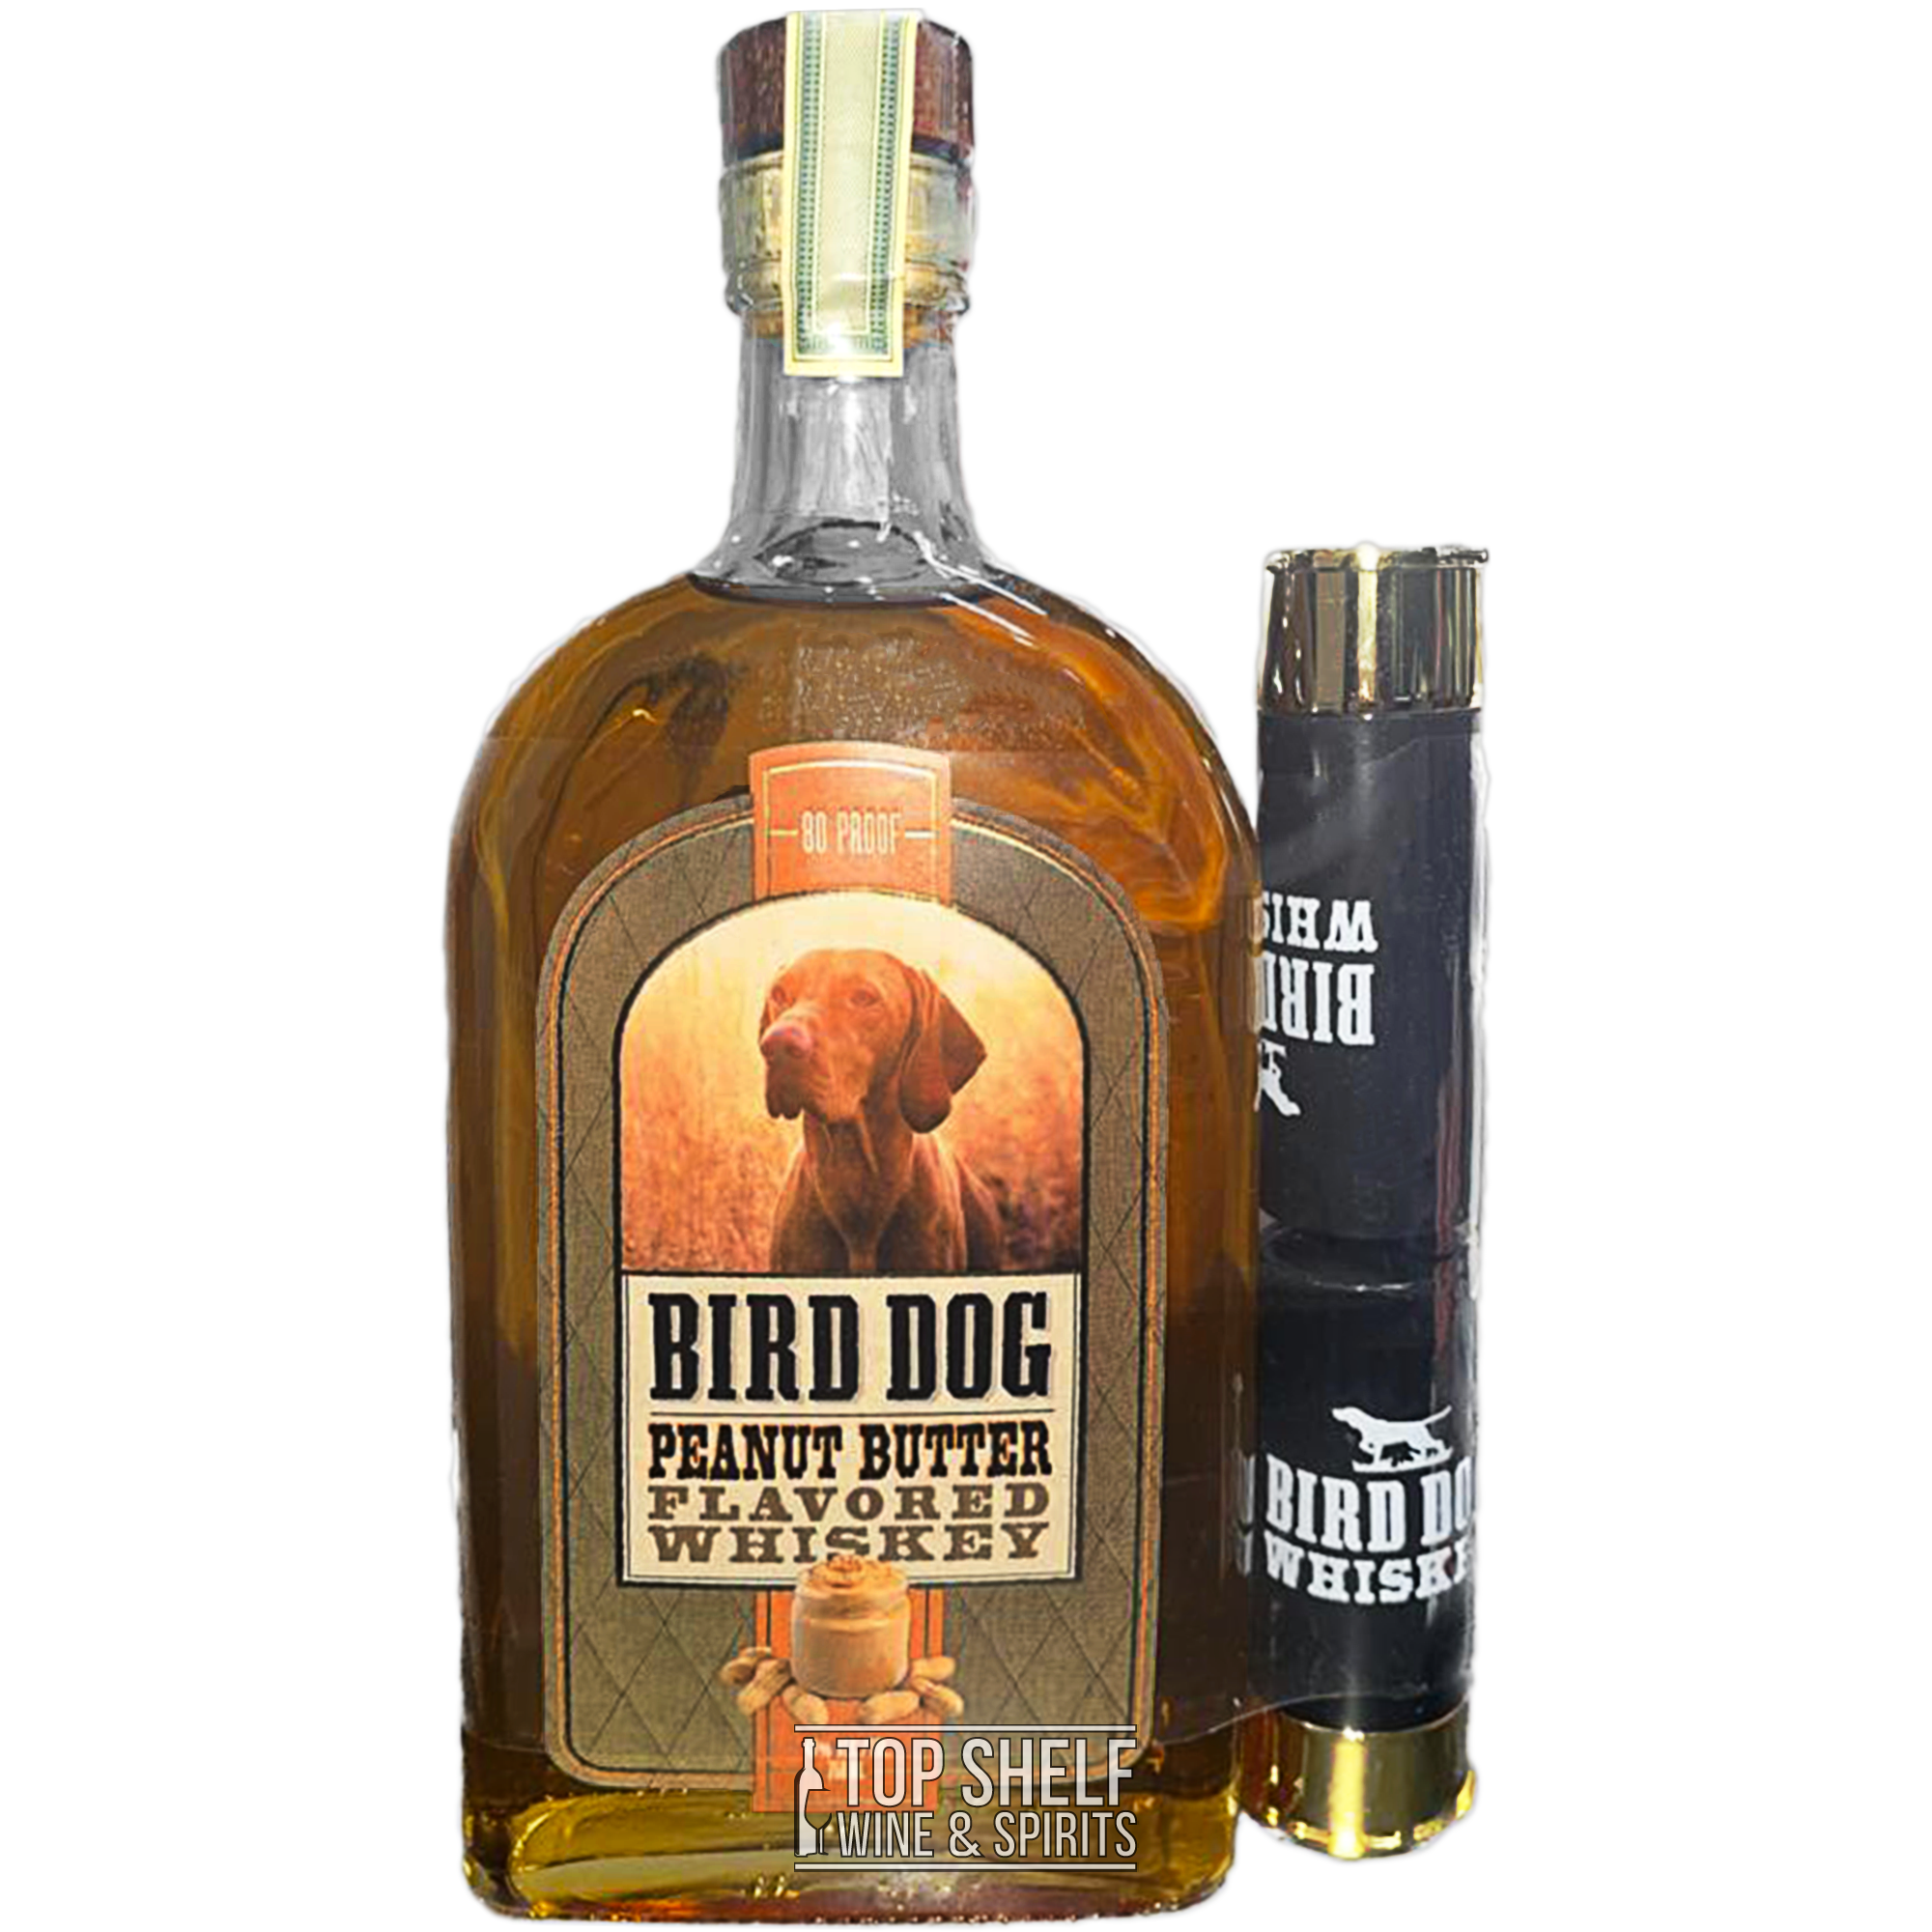 Bird Dog Peanut Butter Flavored Whiskey With 2 Glasses Gift Set